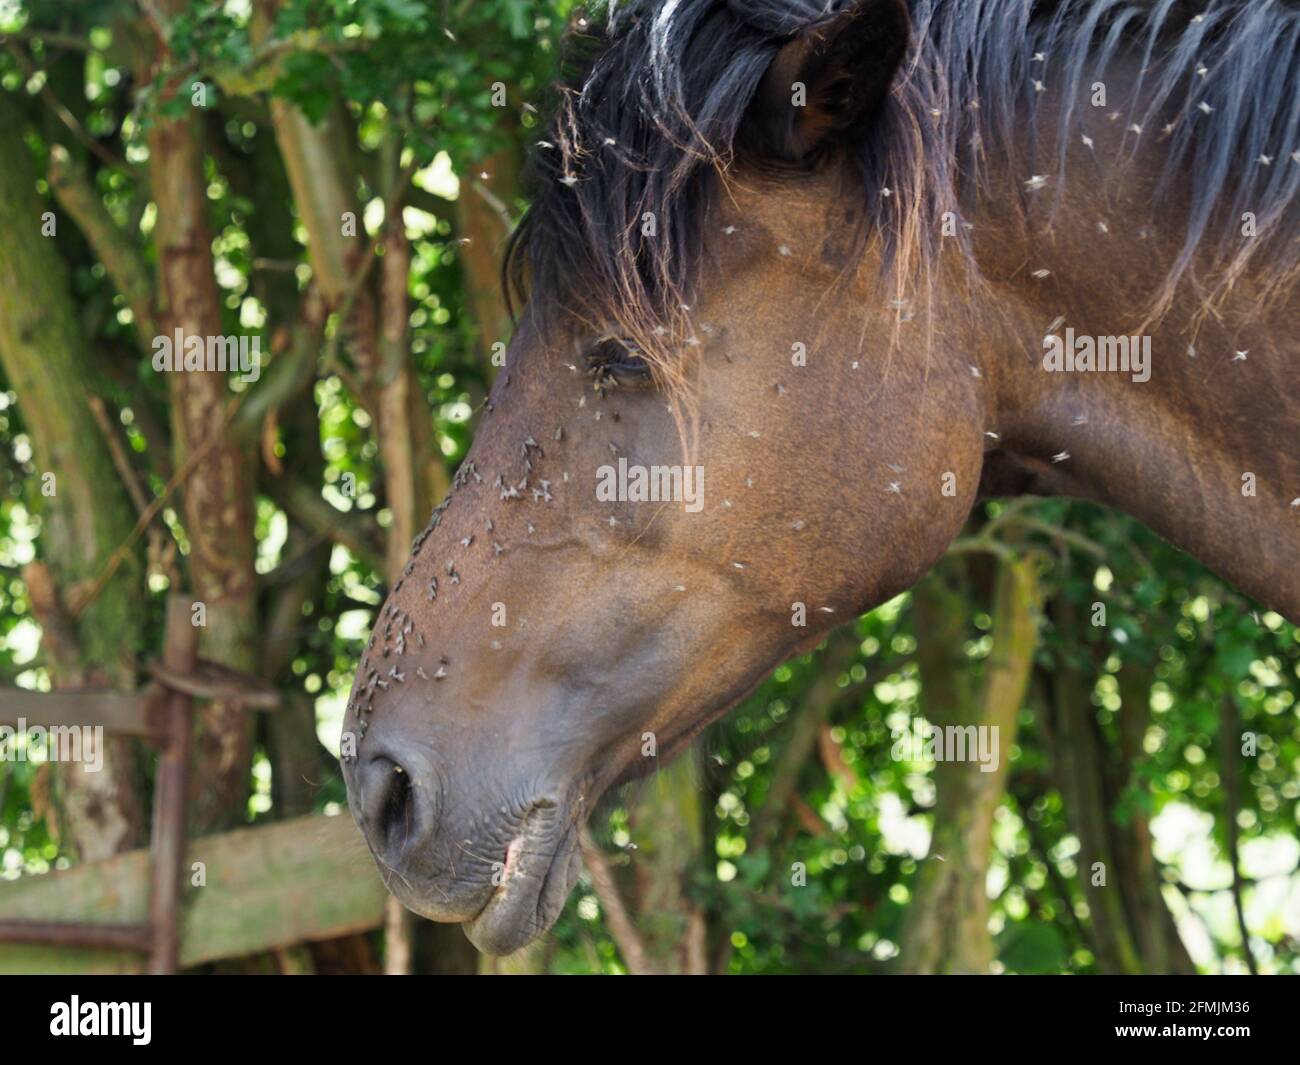 A number of flies pester a horse in the summer. Stock Photo